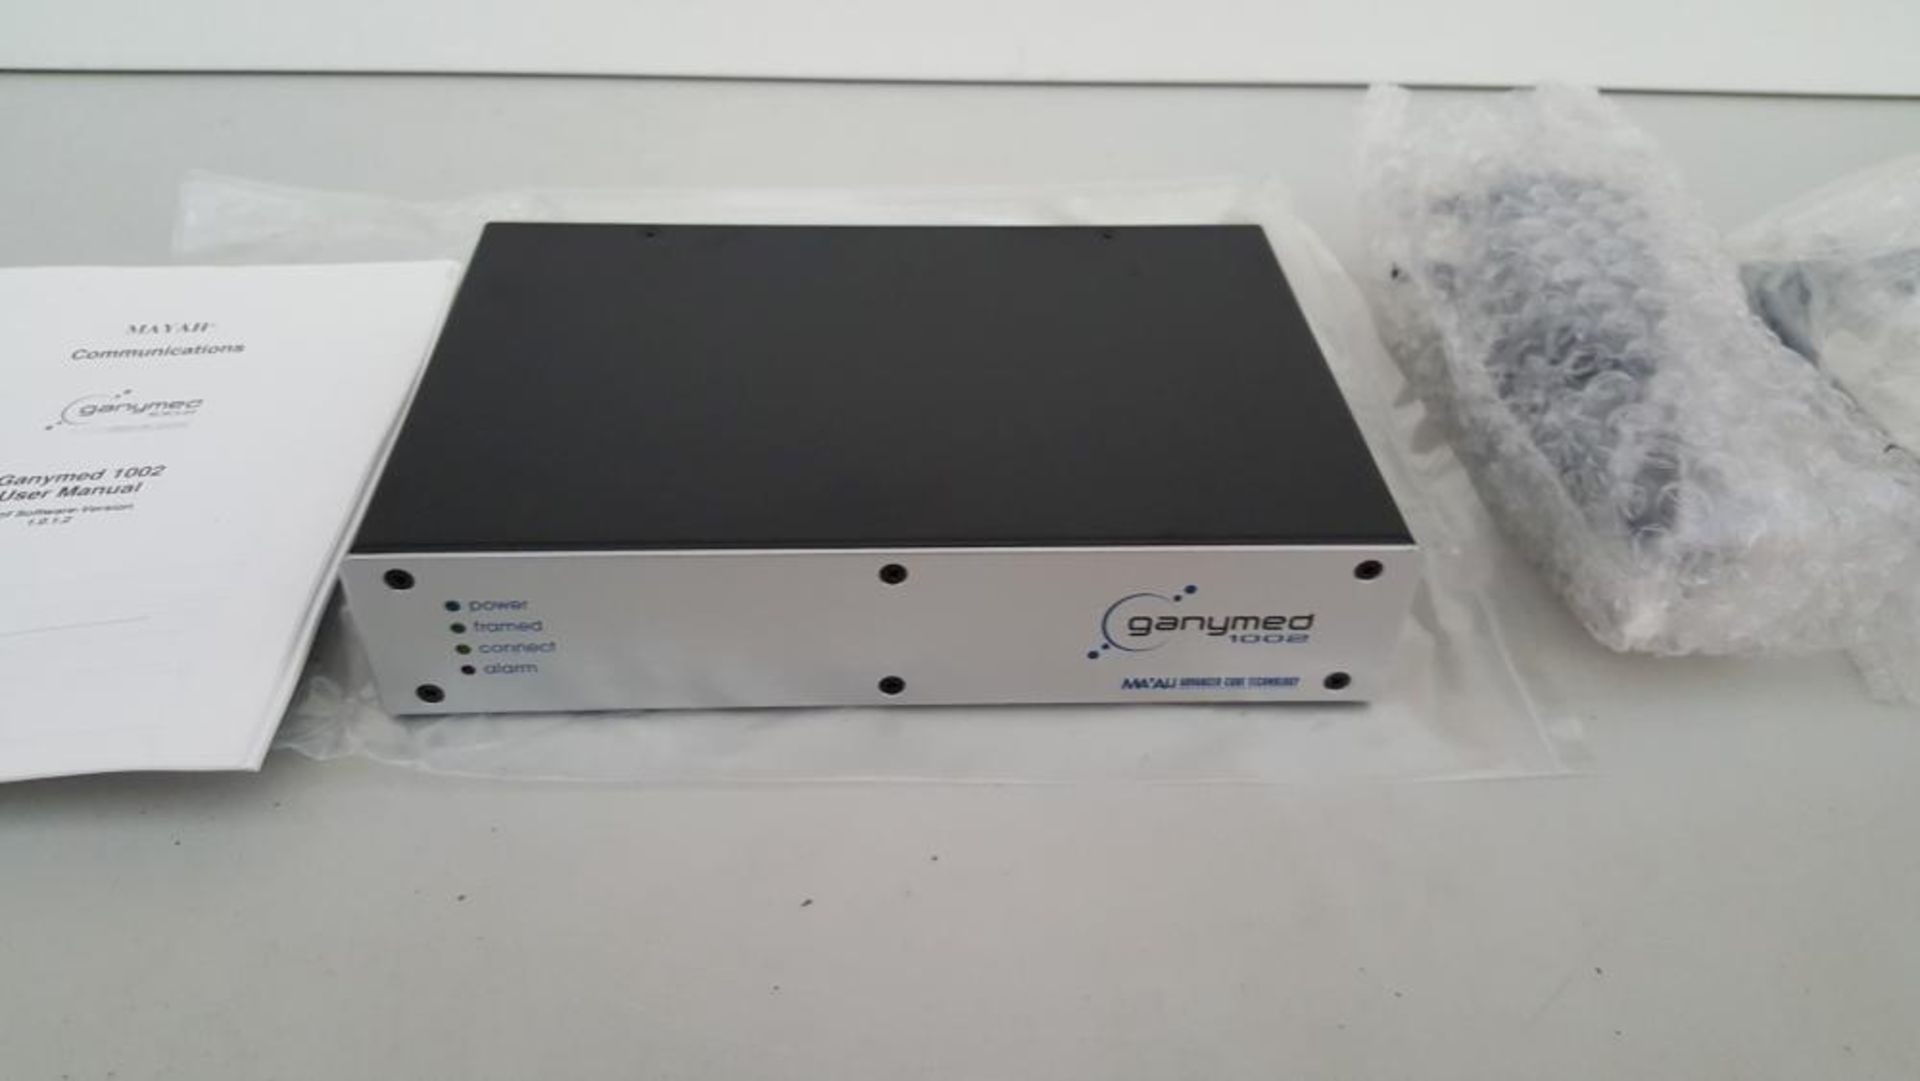 1 x MAYAH COMMUNICATIONS GANYMED 1002 PRO (RRP:£1500.00) - Ref RC102 - CL011 - Location: Altrincham - Image 2 of 3